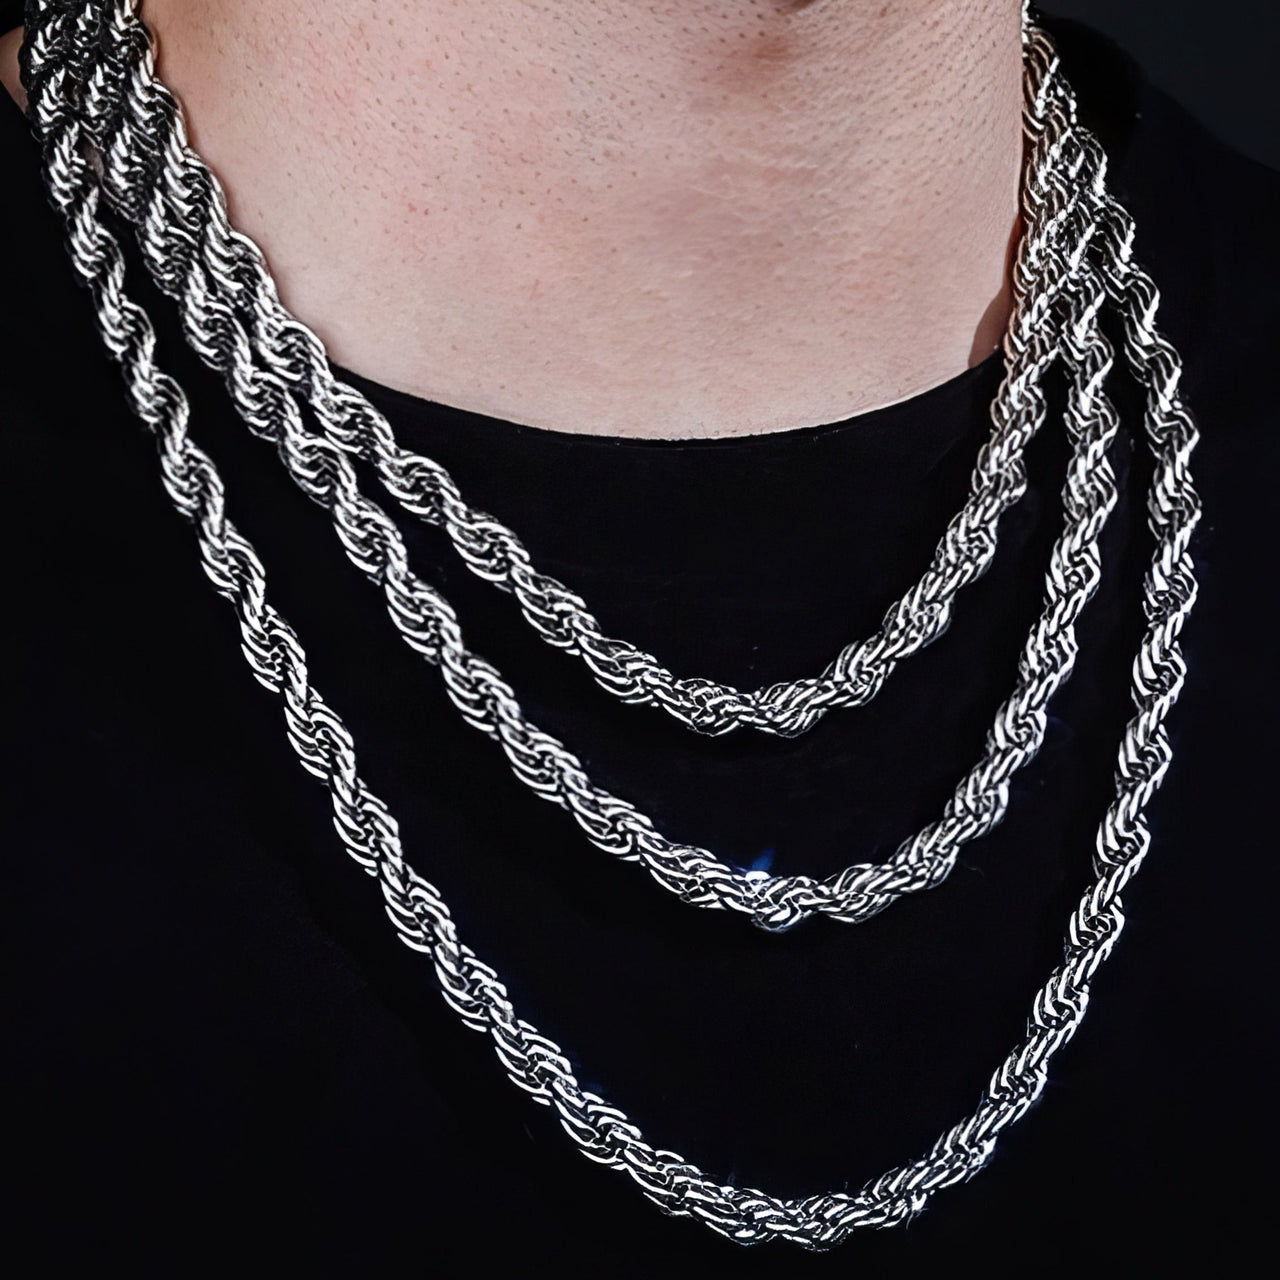 8mm Braided Rope Chain - Different Drips